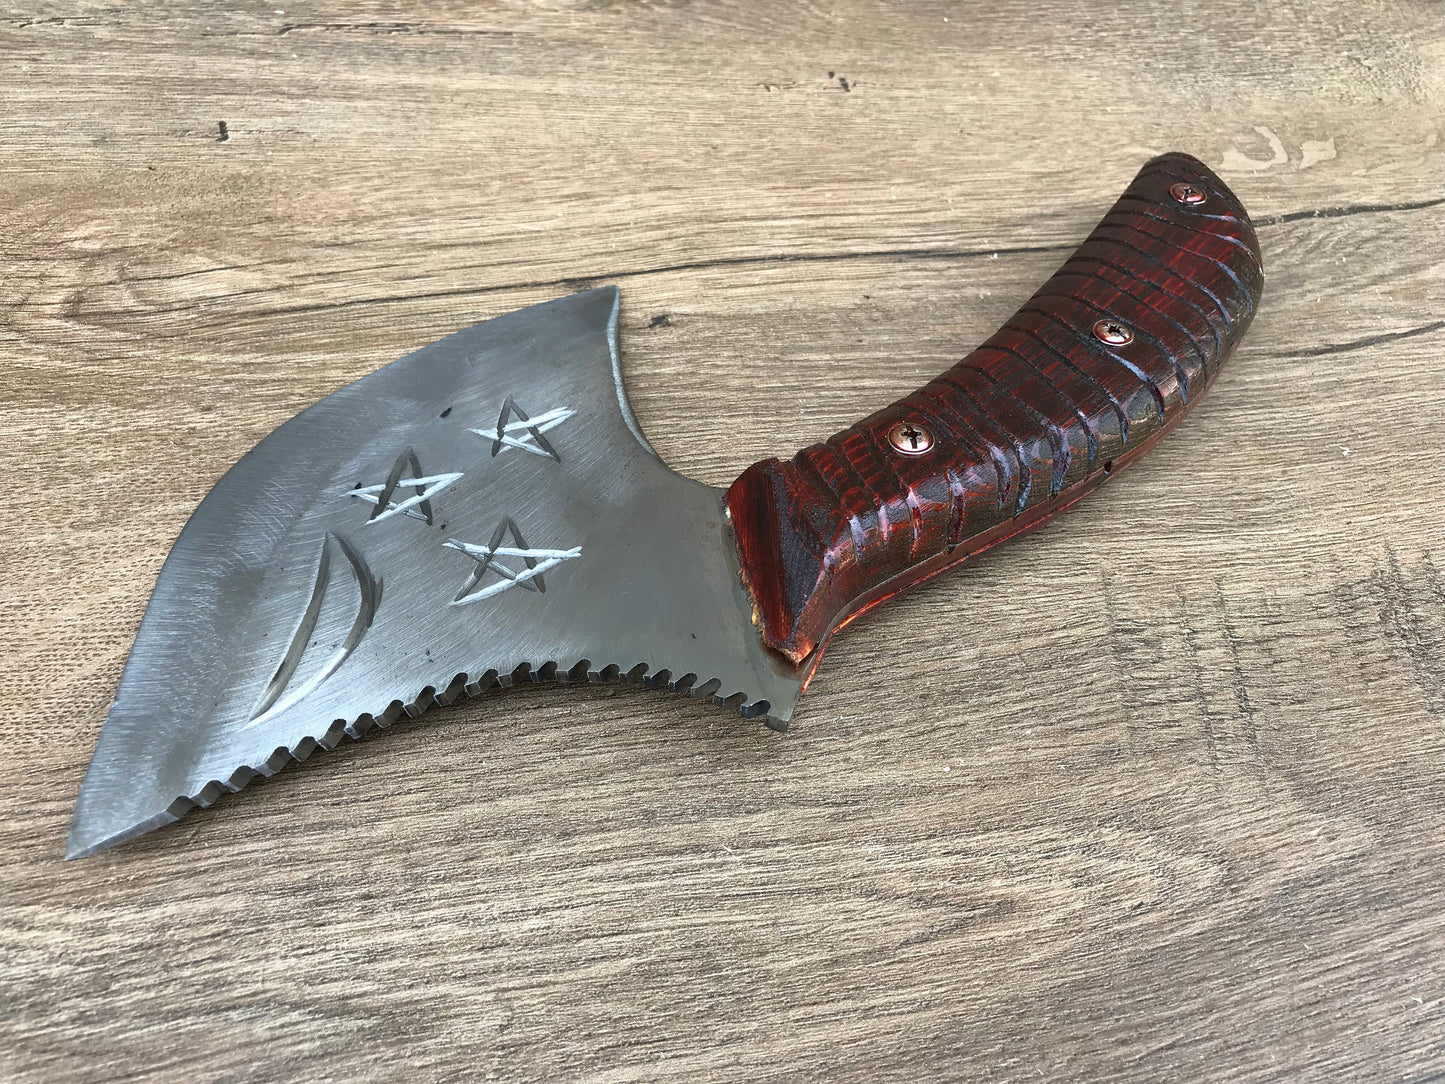 Kitchen axe, kitchen knife, meat cleaver, butchers knife, viking axe, medieval axe, wood carving, meat axe, tomahawk, Damascus steel, axe